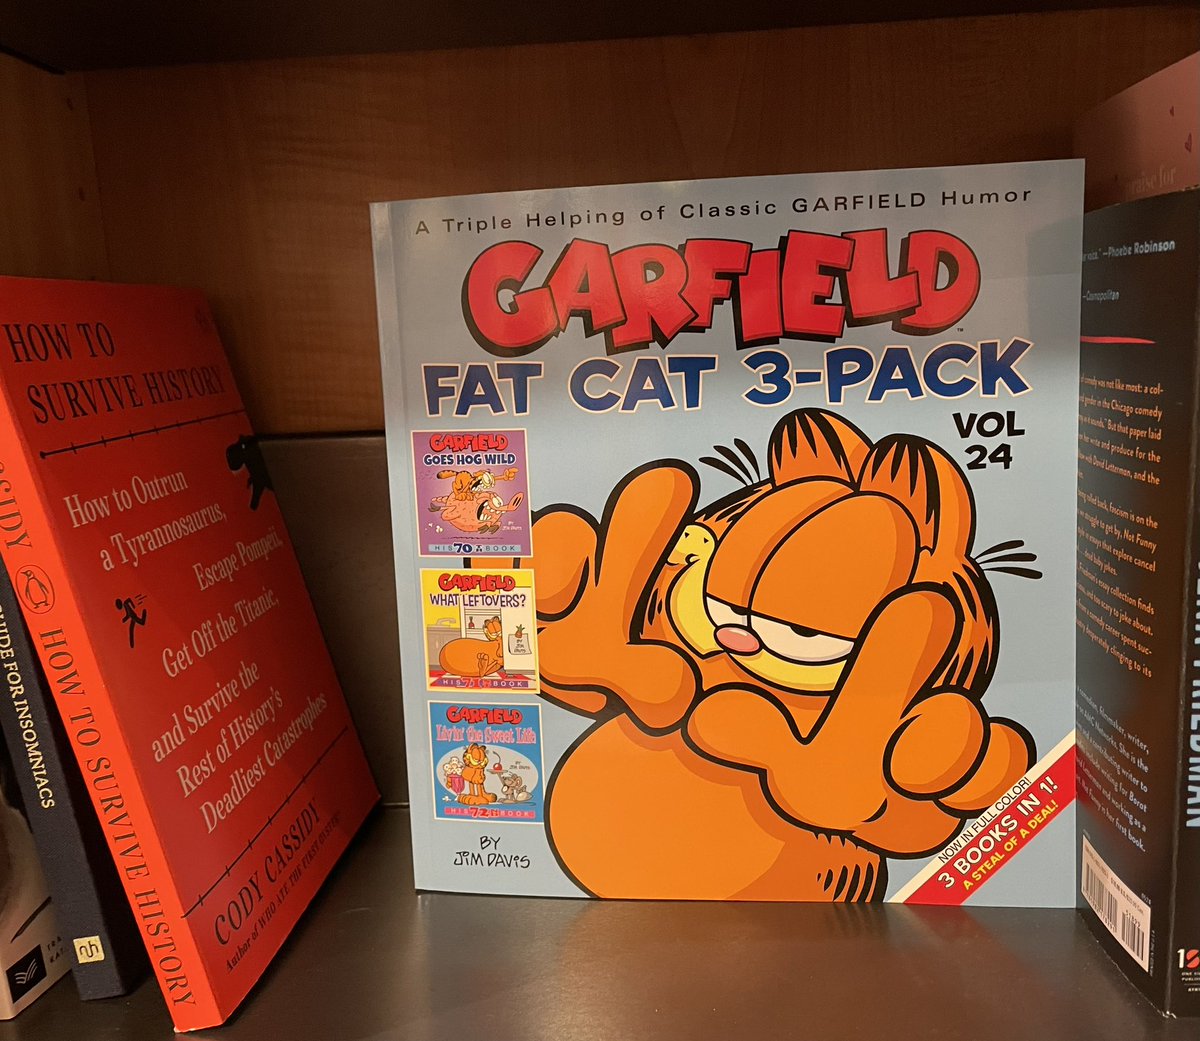 Before you watch Chris Pratt voice a cat who loves lasagna this weekend, read some classic #Garfield comics! Look for this orange feline in our humor section 🐱 #indiebookstore #comicstrips #humor